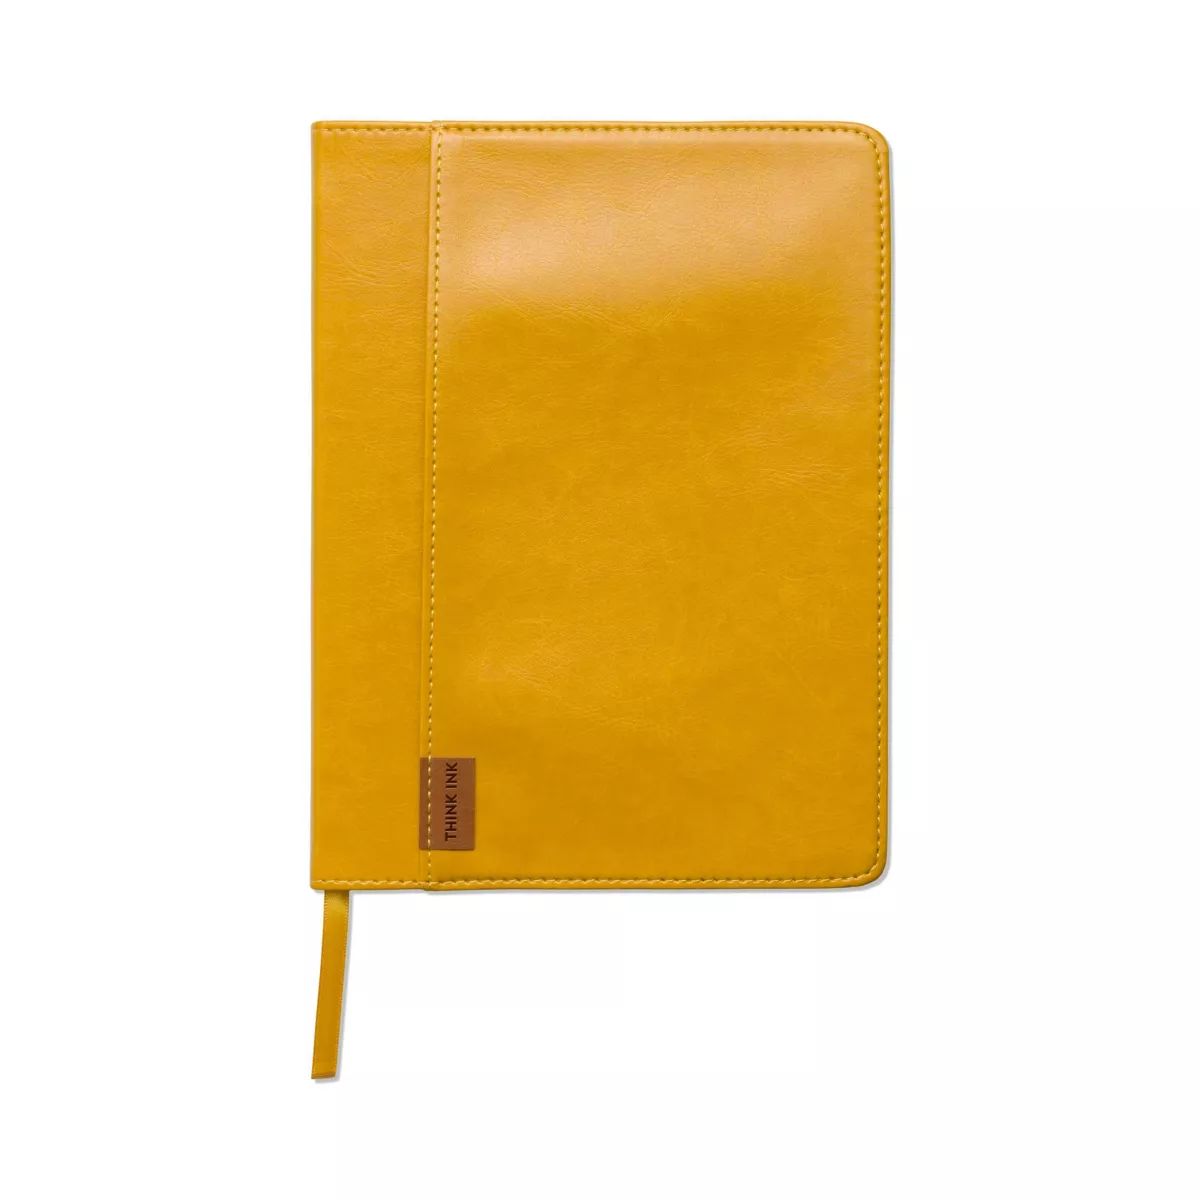 Ruled Journal Vegan Leather with Pocket 6.25"x8.25" Mellow Yellow - DesignWorks Ink | Target